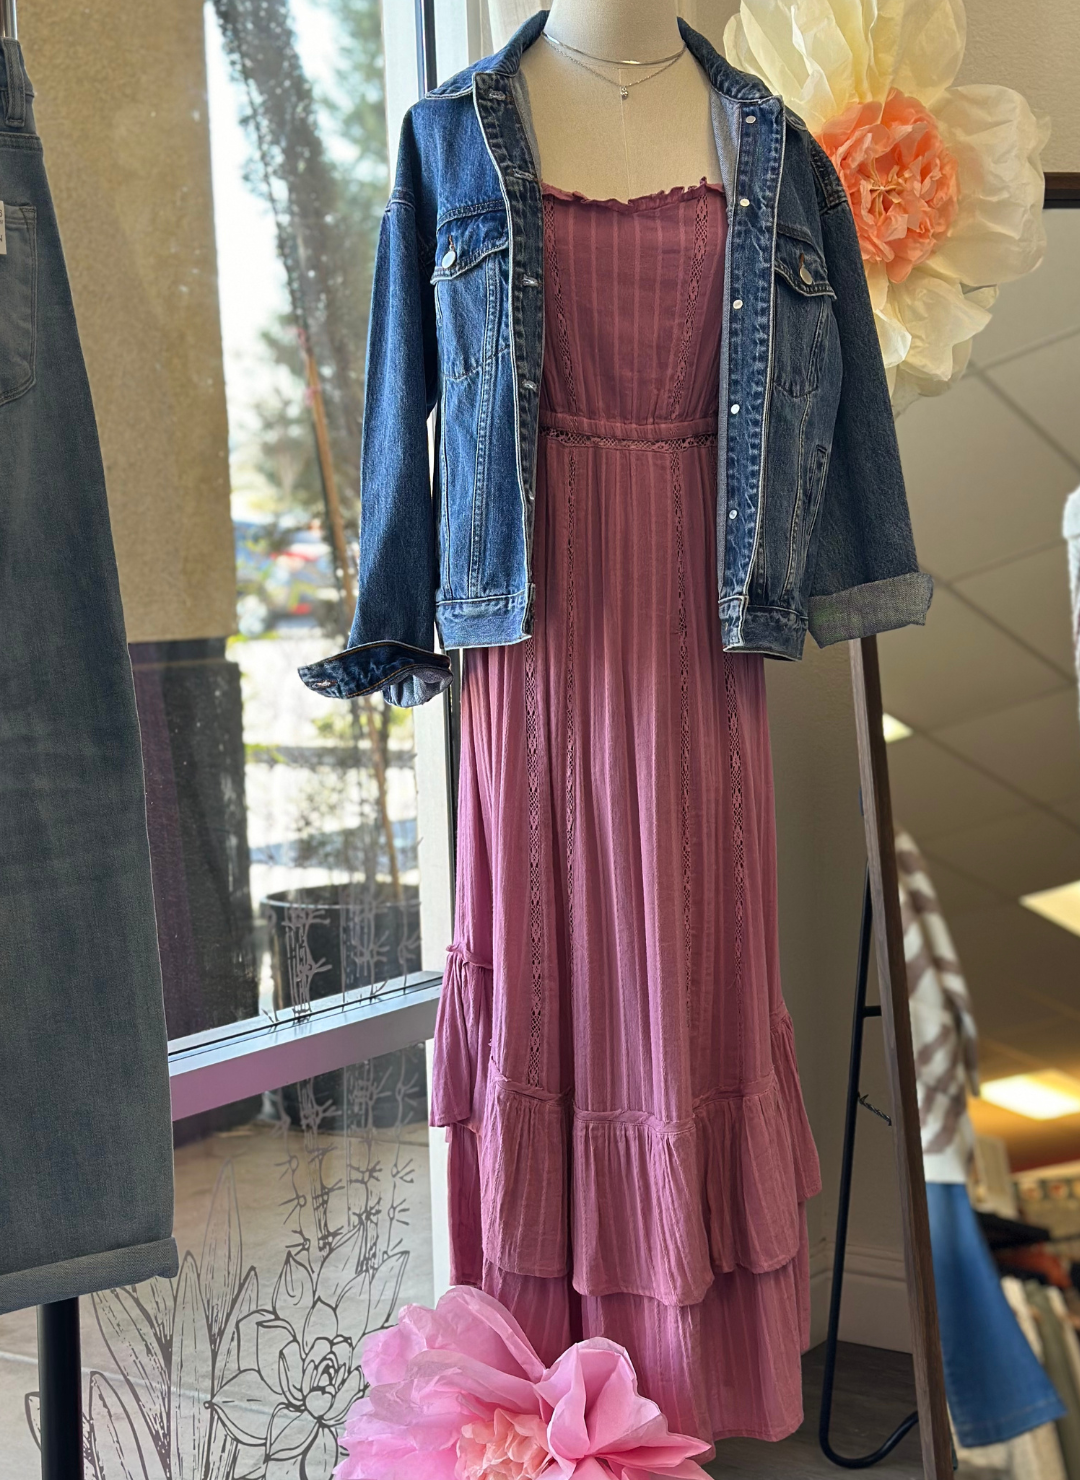 Full view of ZS Rose Maxi Dress paired with denim jacket. Model is standing in front window